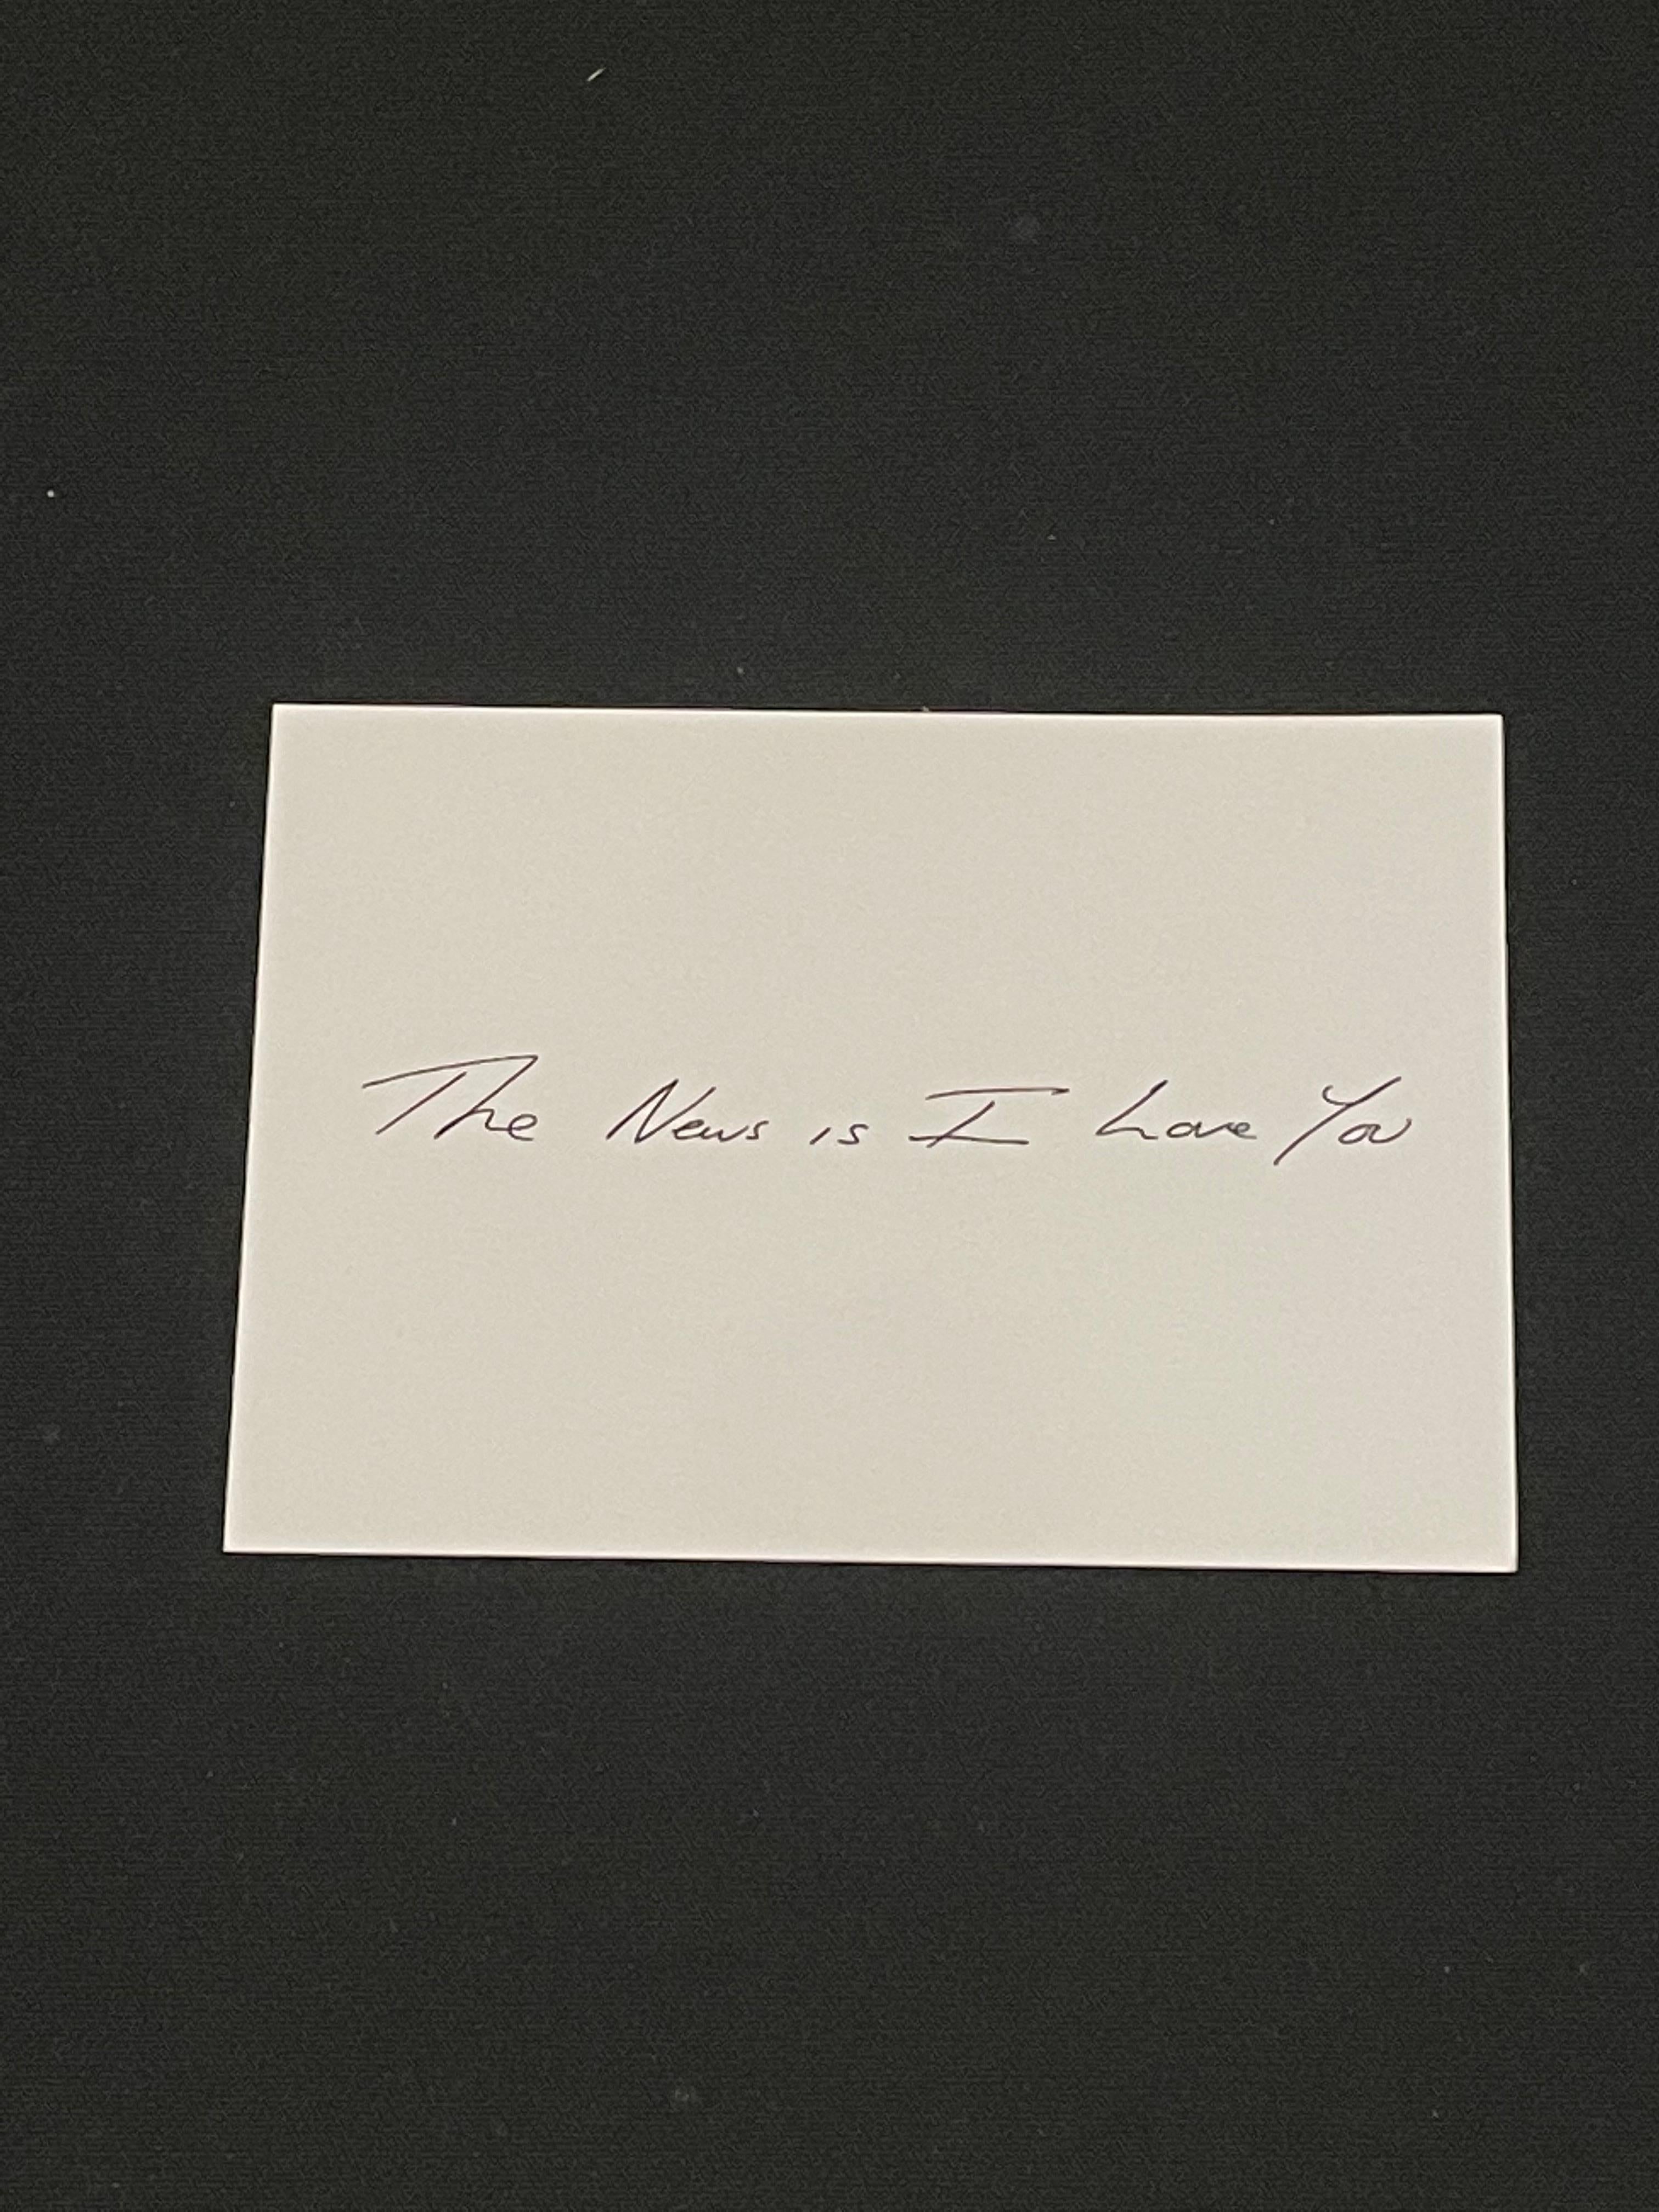 Tracey Emin, The News Is I Love You 3